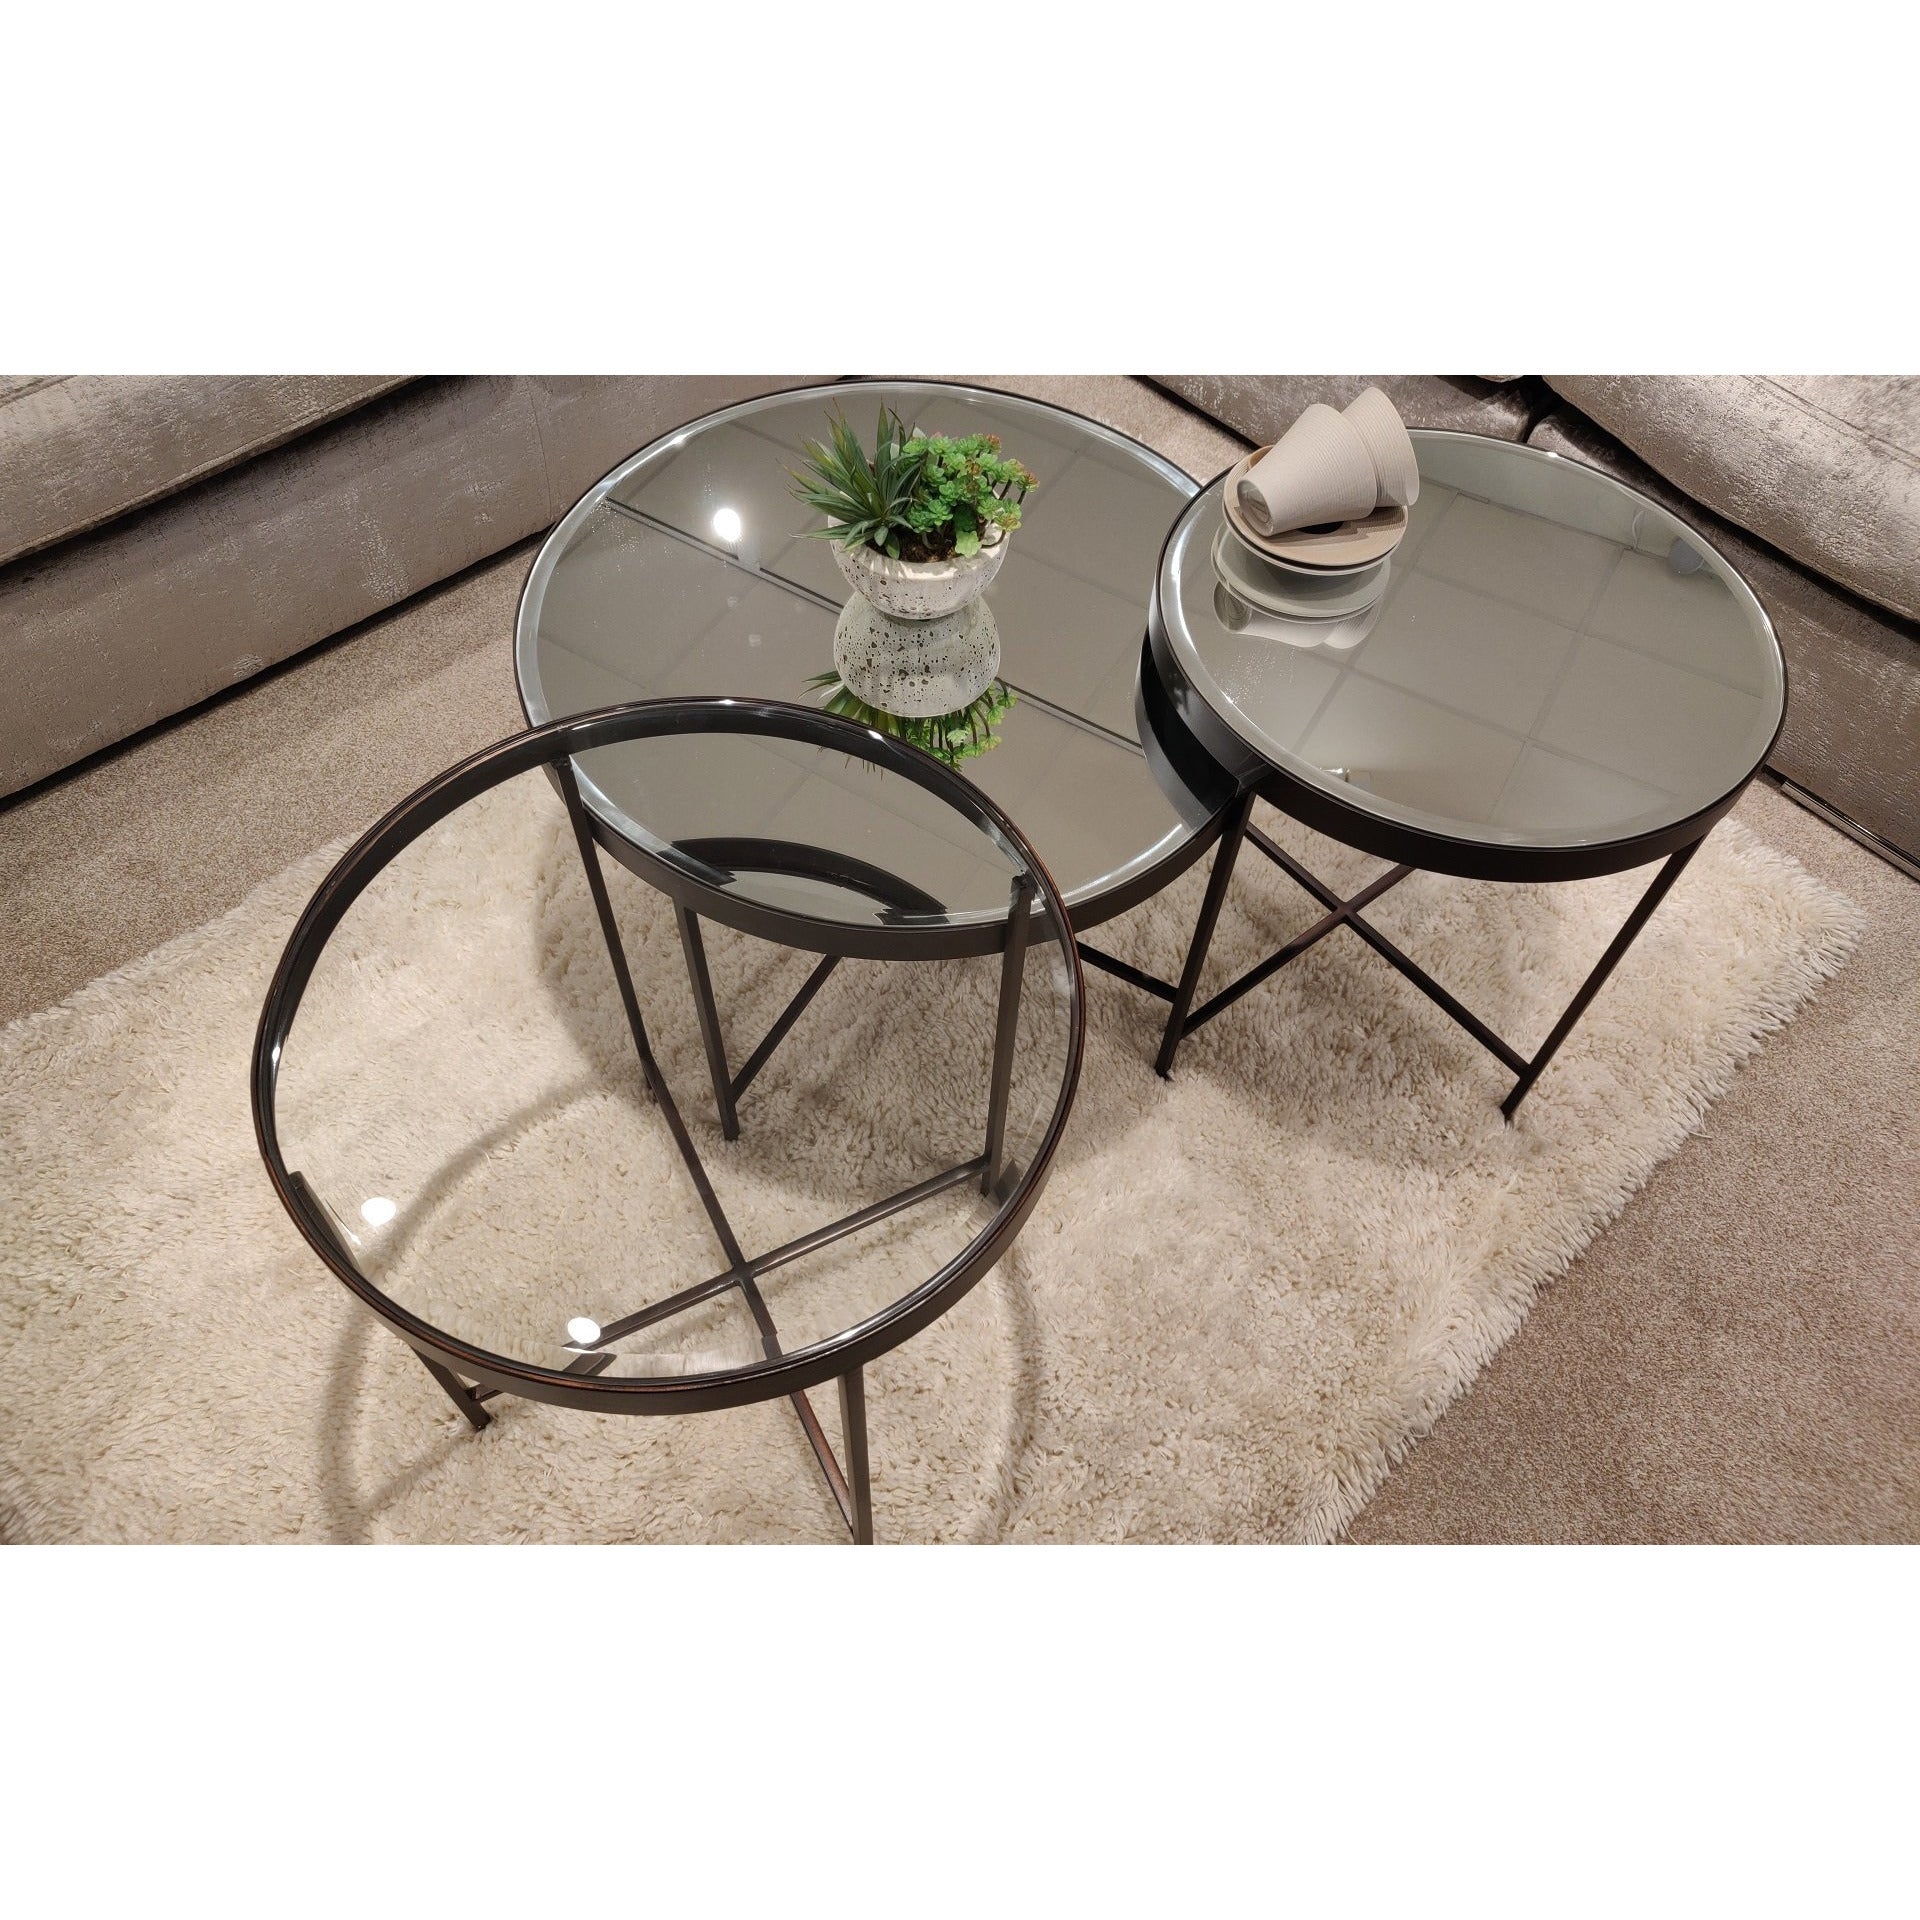 Manhattan Trio Of Coffee Tables from Upstairs Downstairs Furniture in Lisburn, Monaghan and Enniskillen